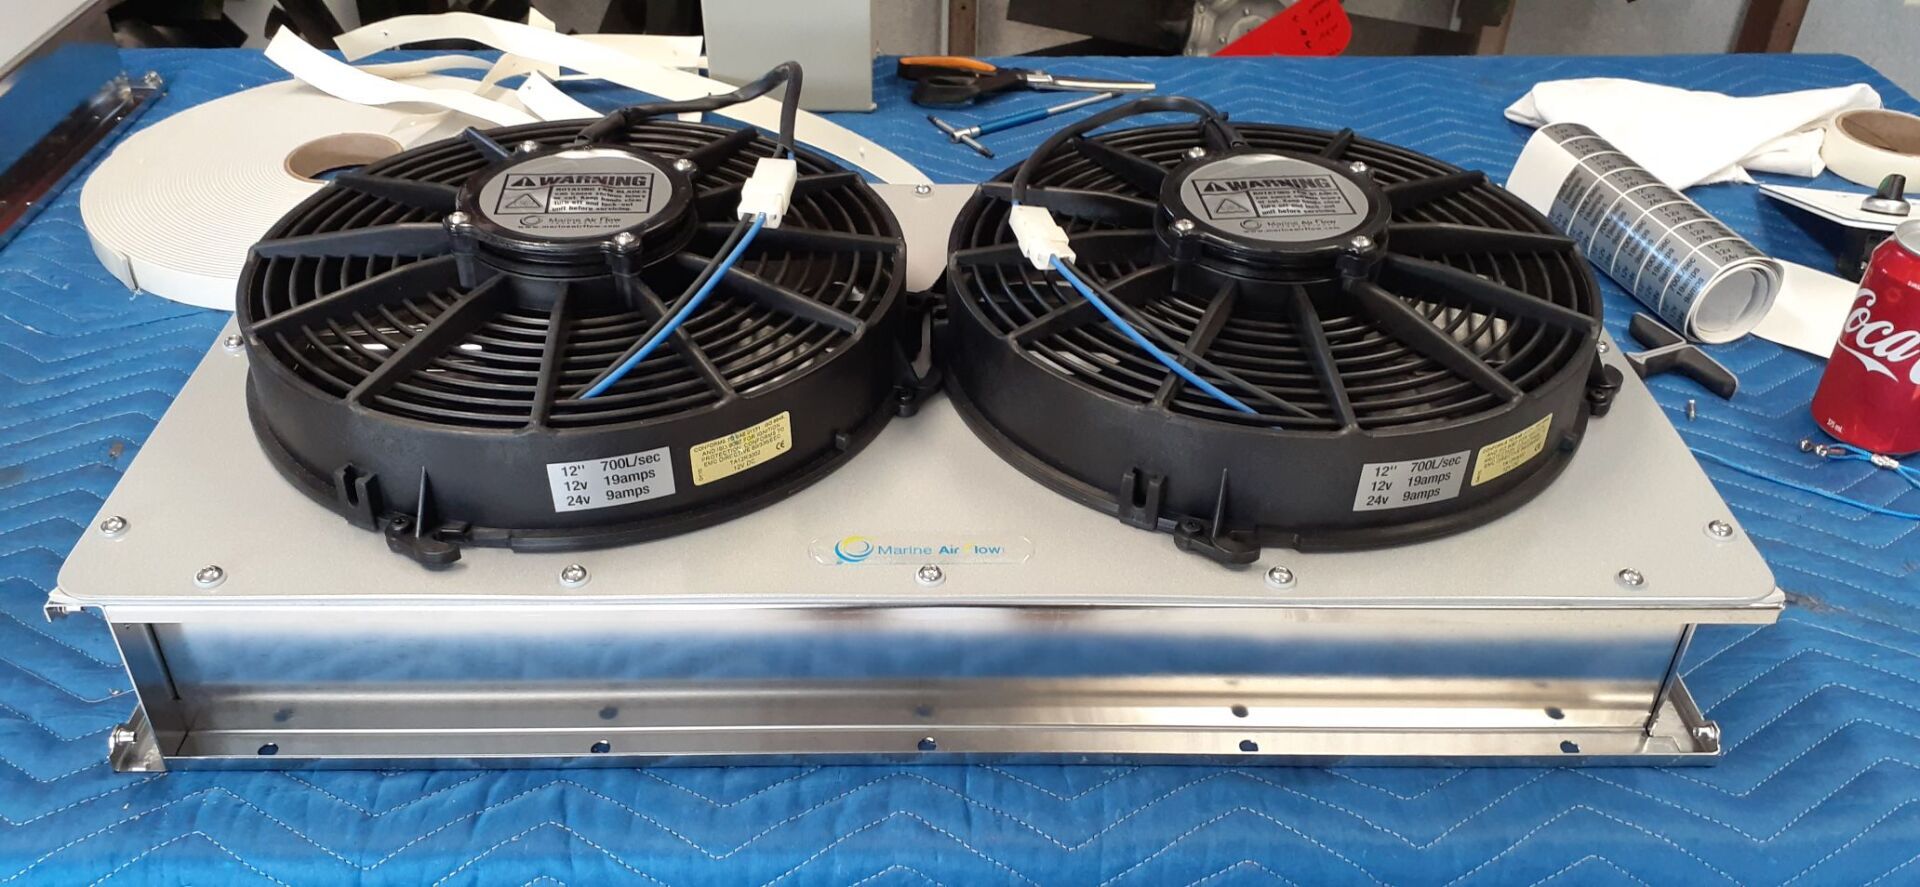 Fans mounted on the grille ready for export